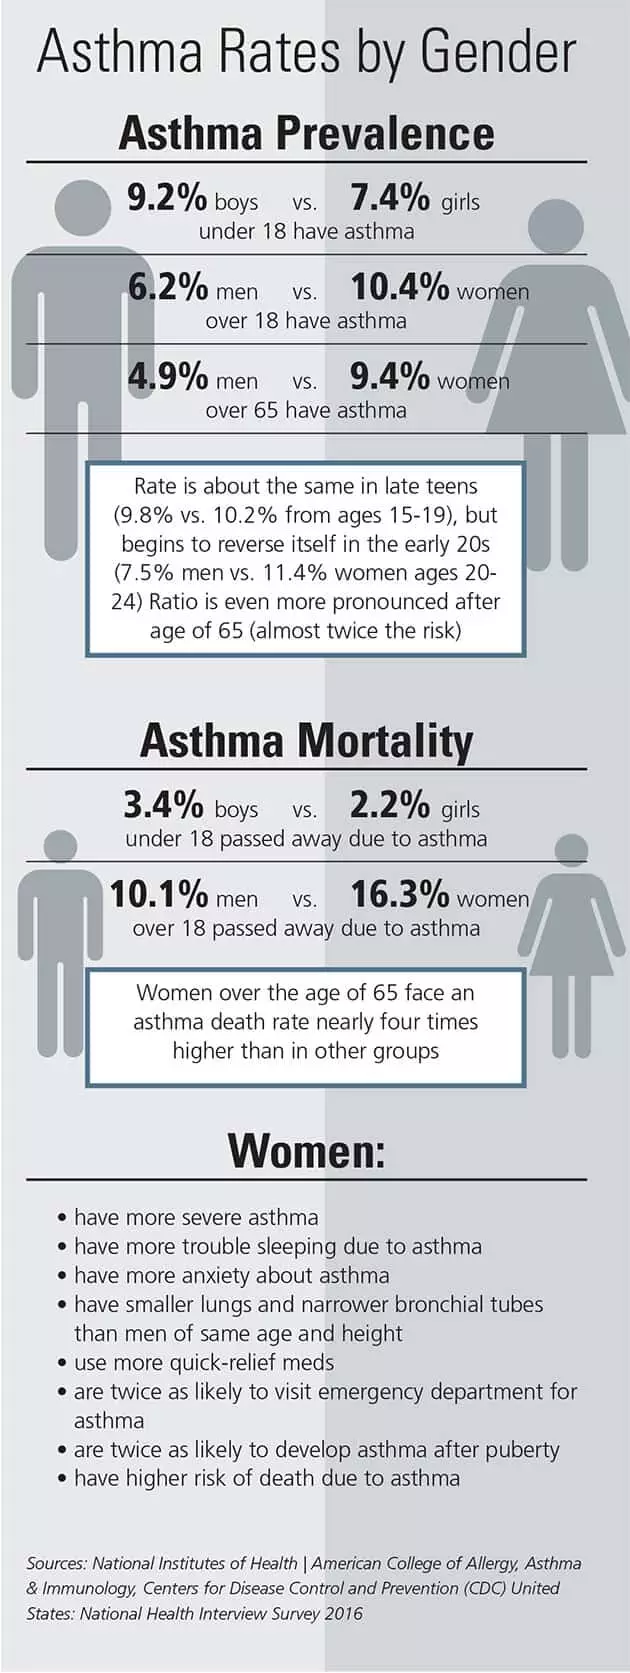 Infographic of Asthma Rates by Gender from NIH 2016